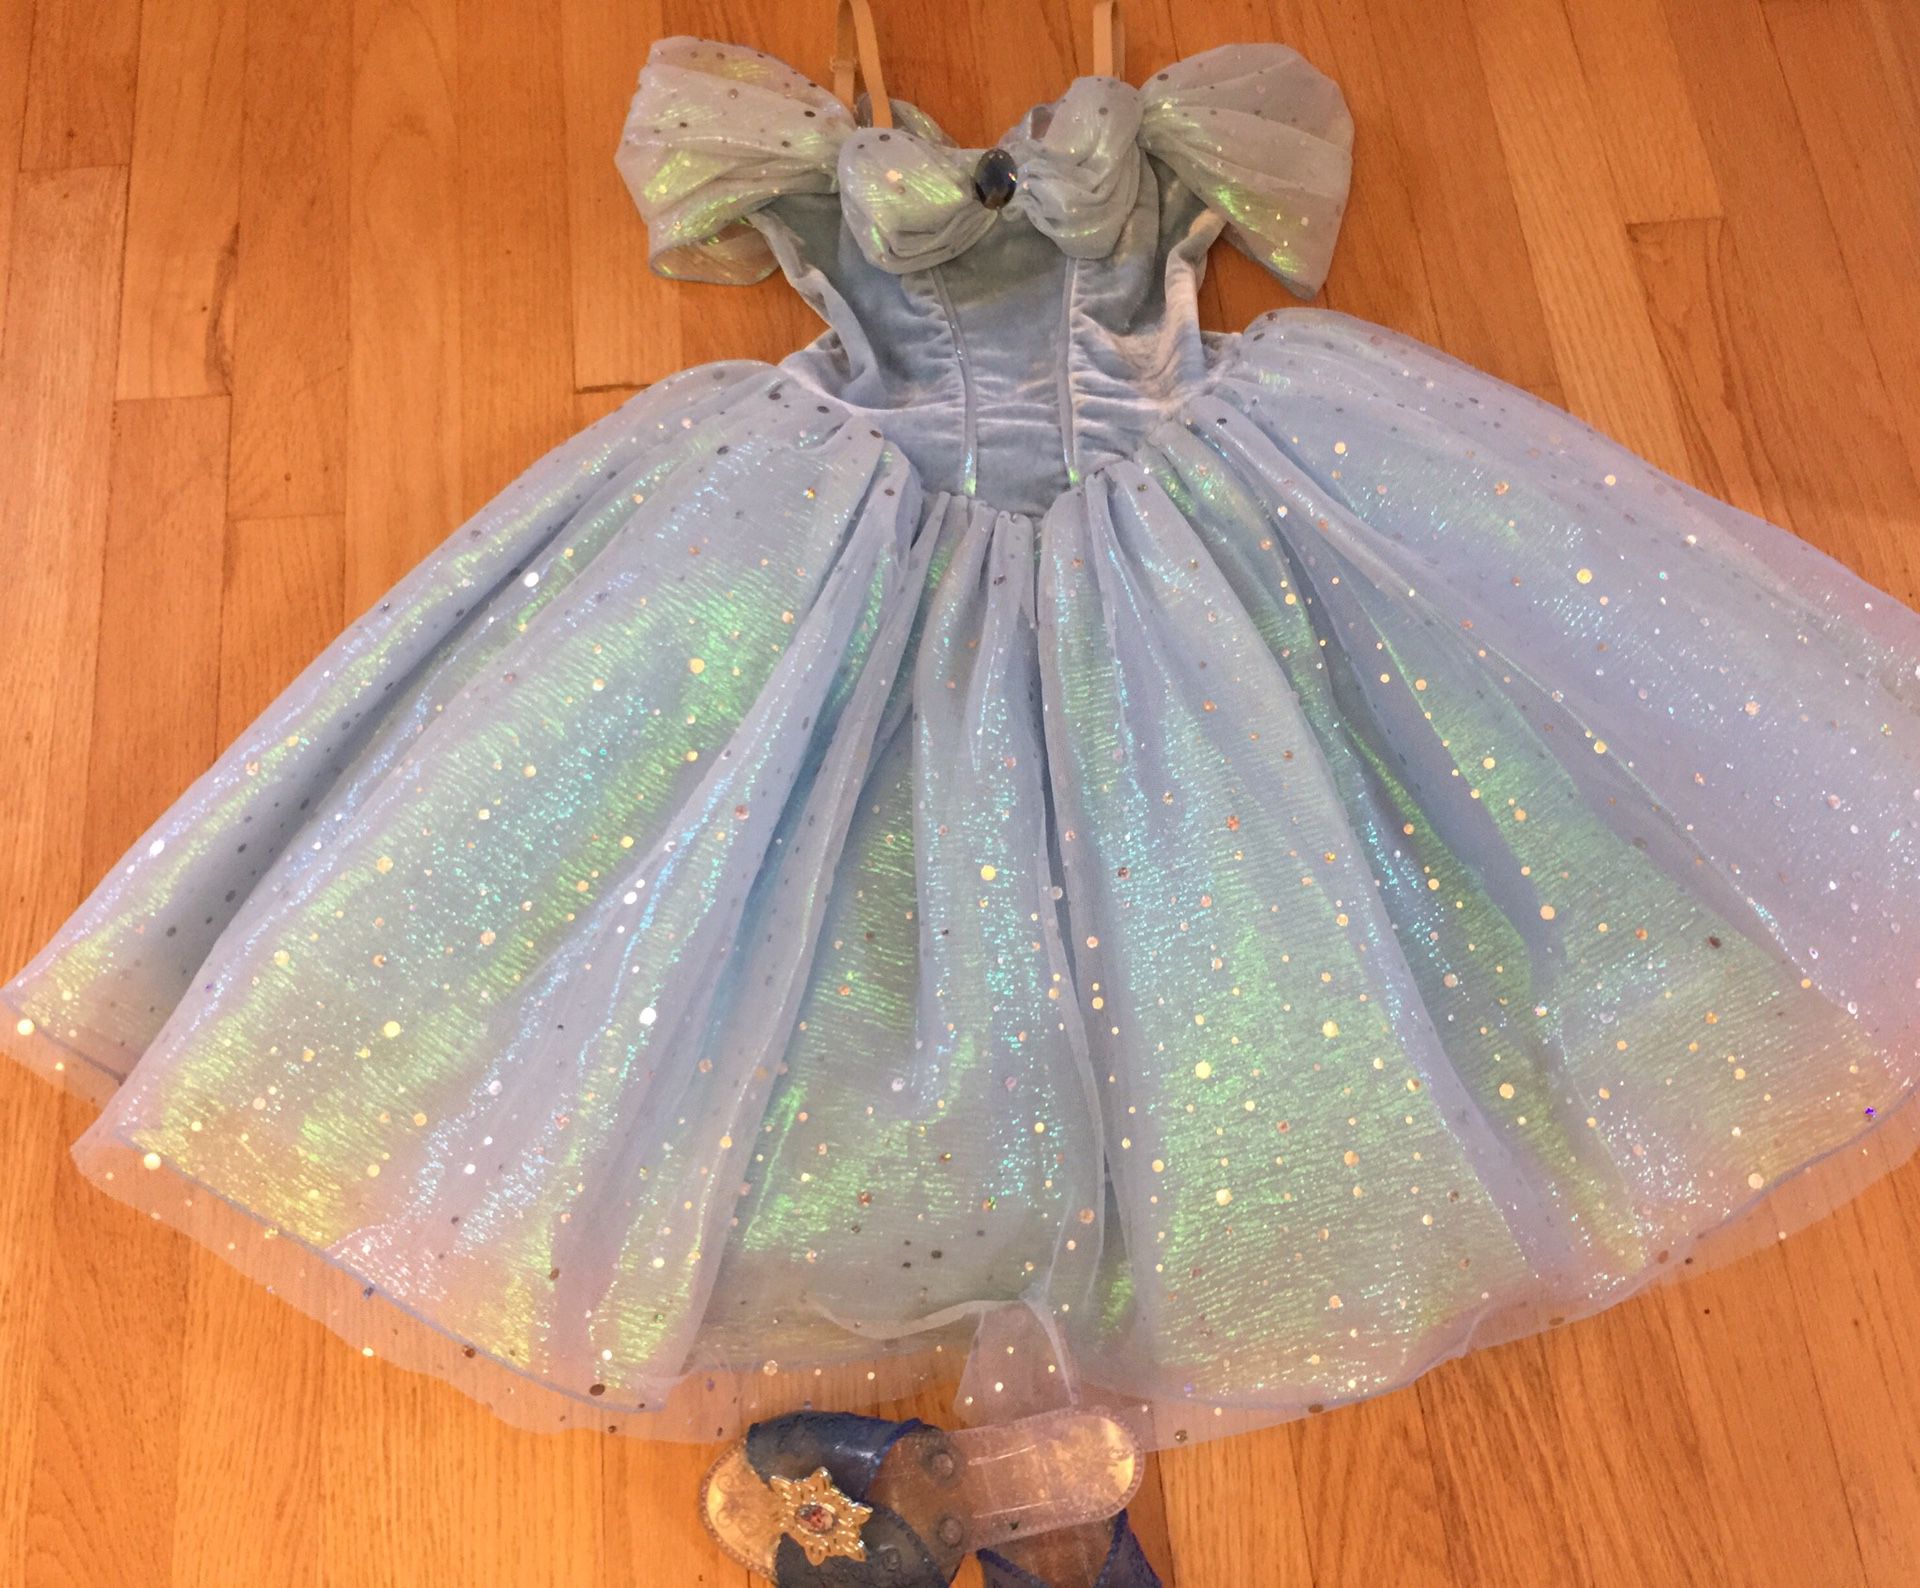 Cinderella costume with shoes